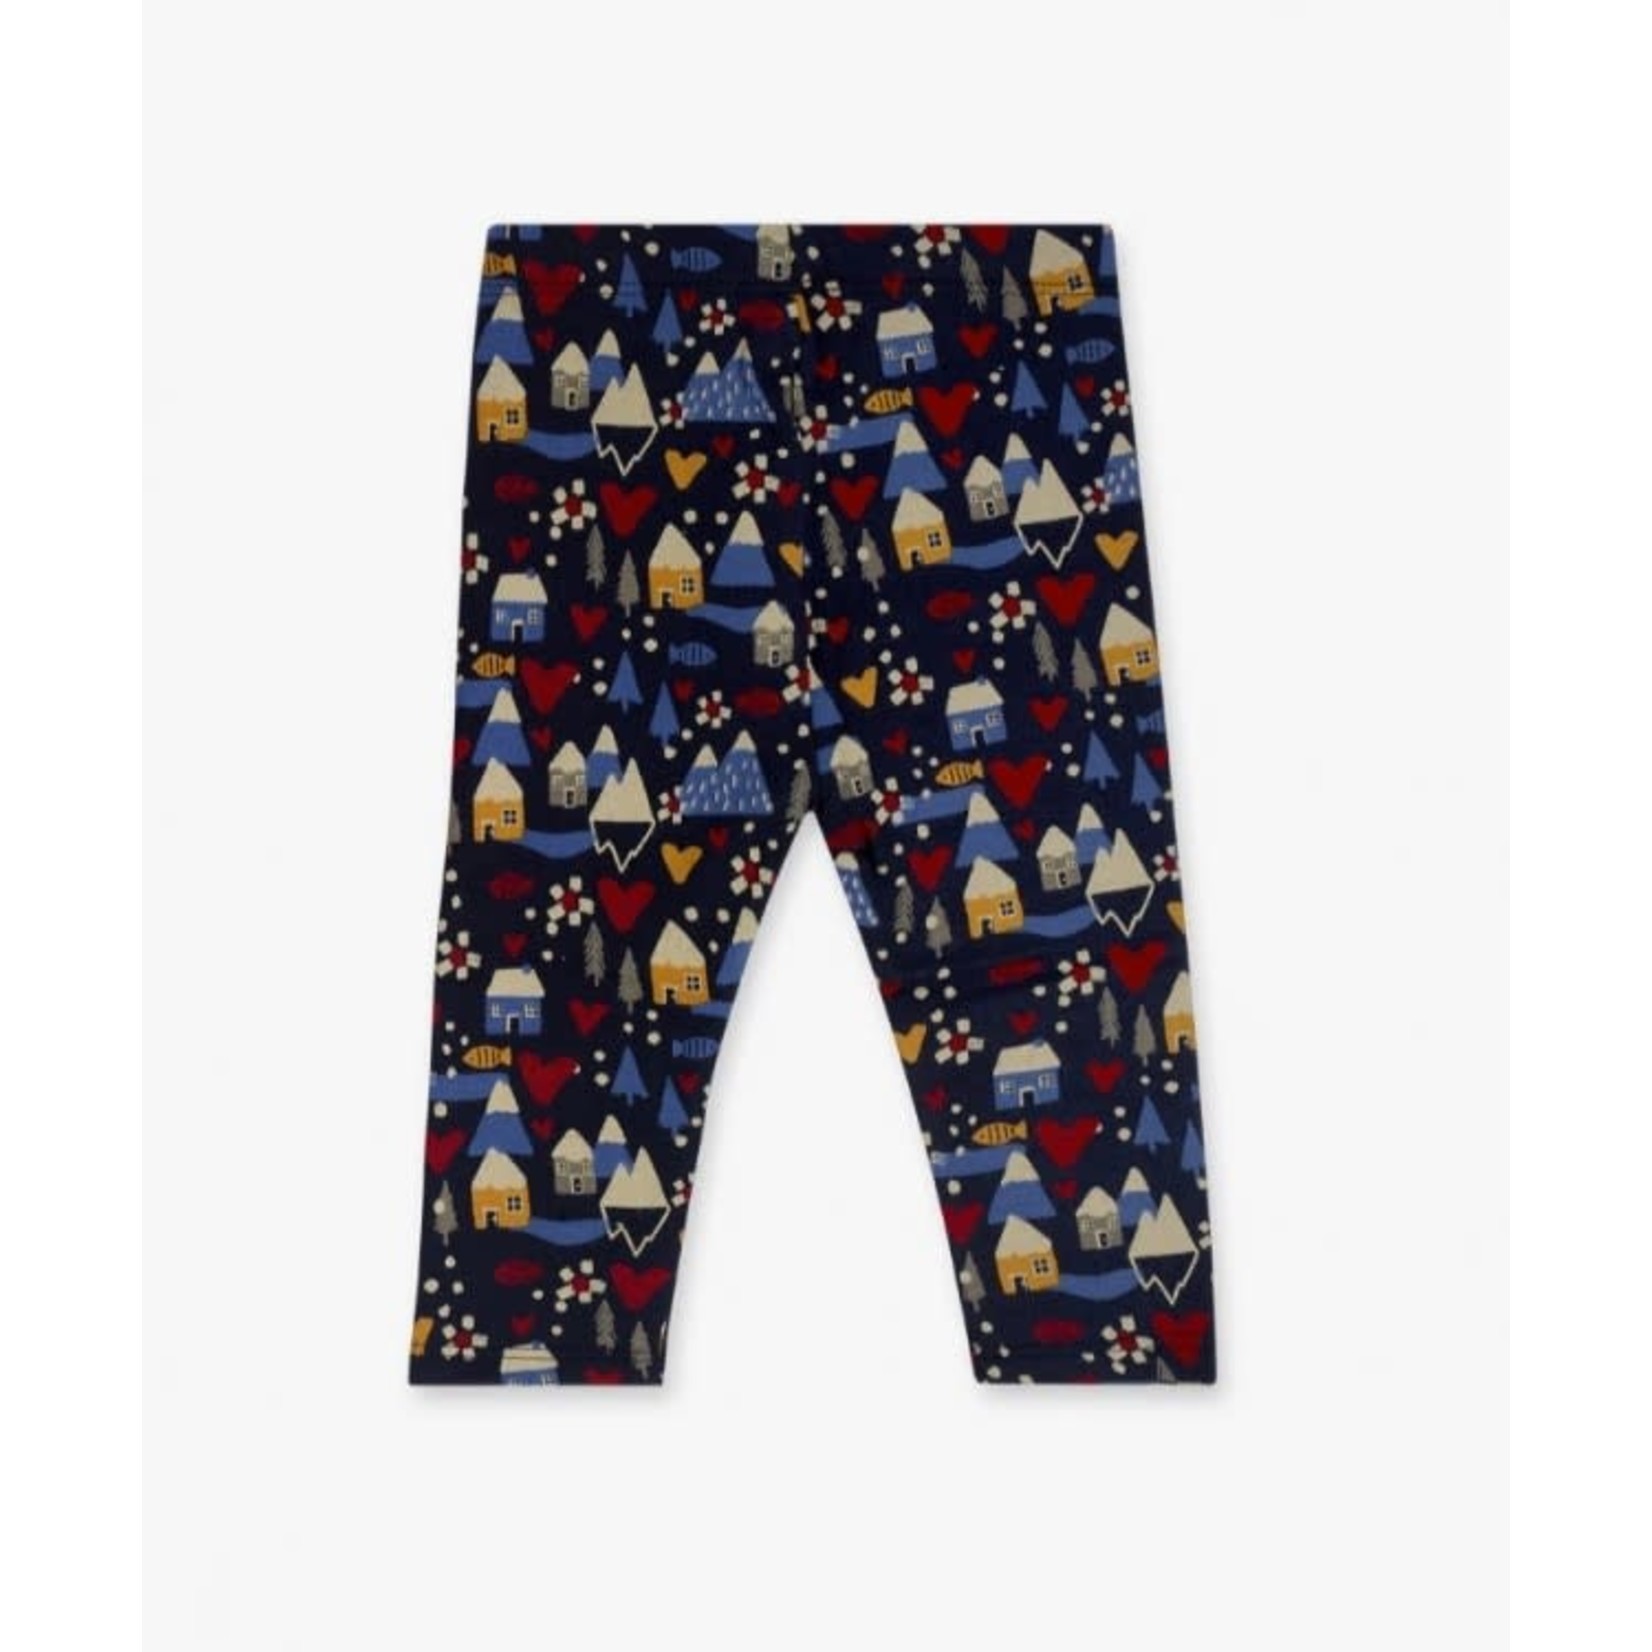 TucTuc TUC TUC - Fleece-lined legging with arctic landscape print 'Fishing Club'